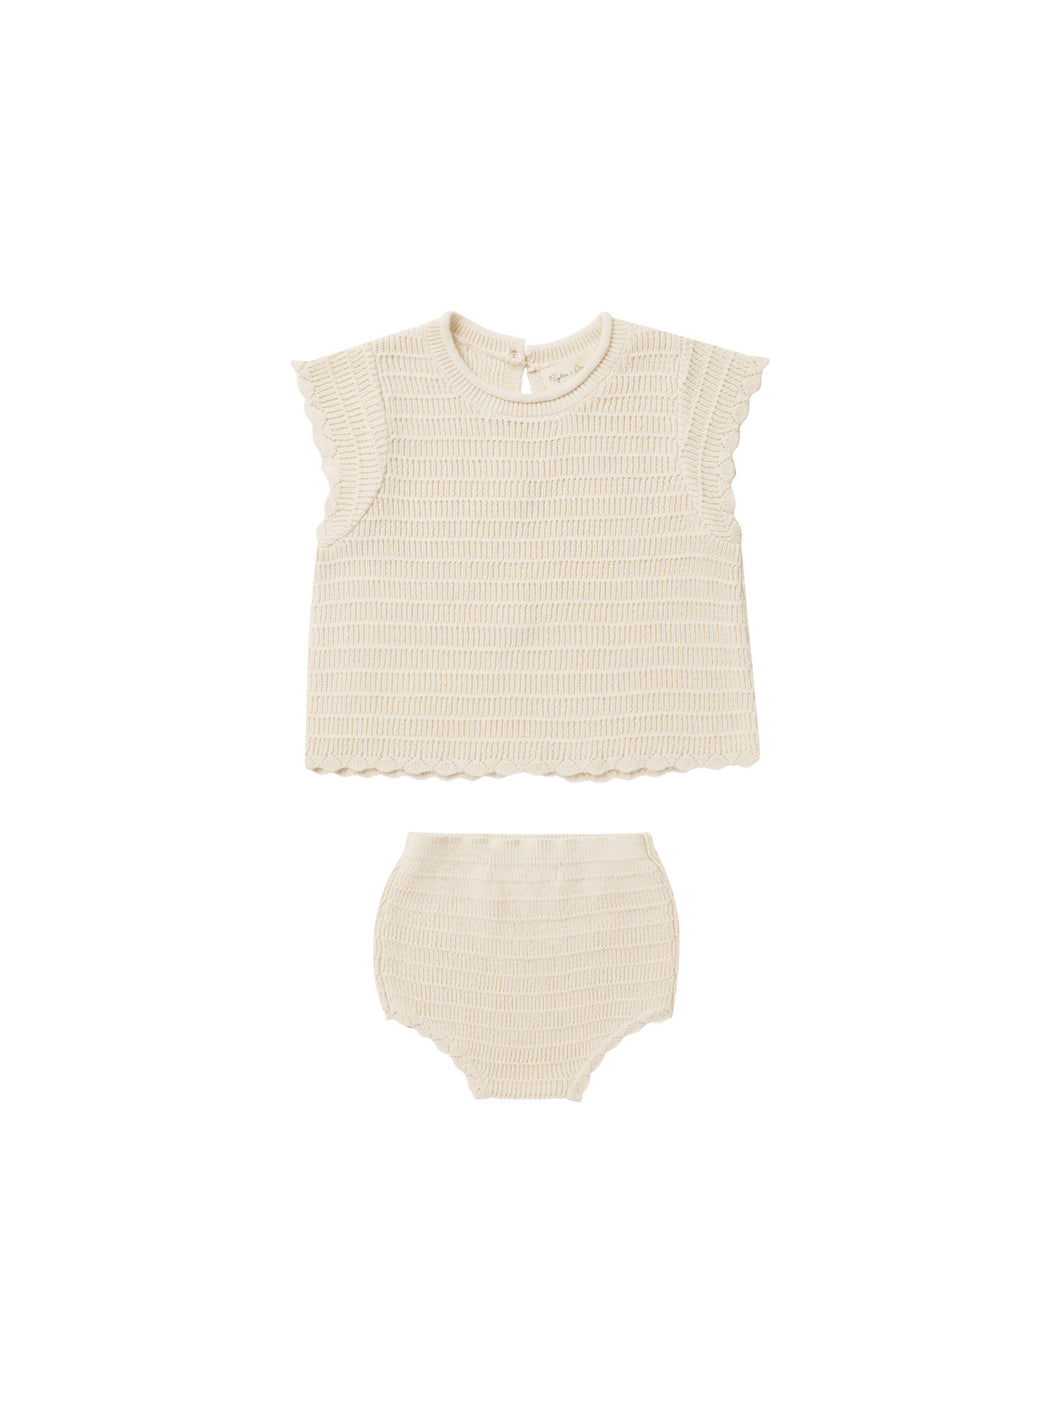 This crochet knit set has all the throwback vibes with scalloped short sleeves and edges, buttons on back with opening on bottom half, and coordinating bloomers with scalloped edges and a beige colour. 